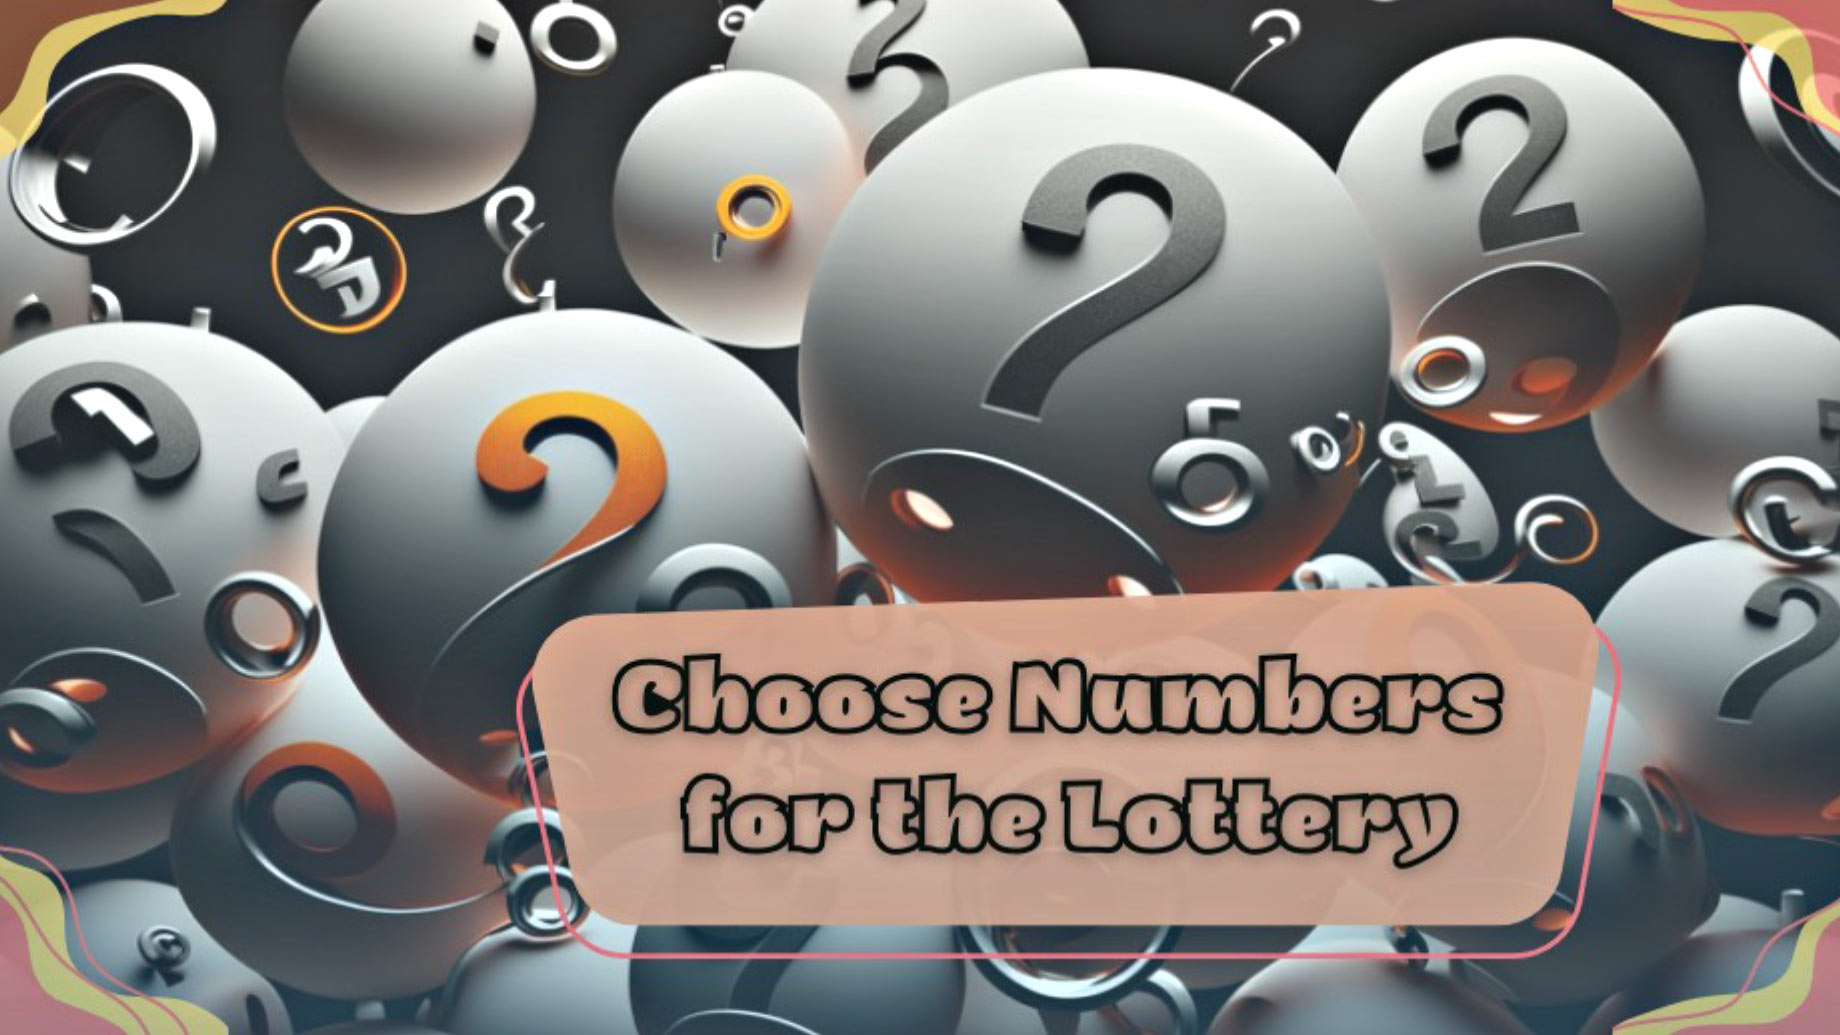 How To Choose Numbers For The Lottery